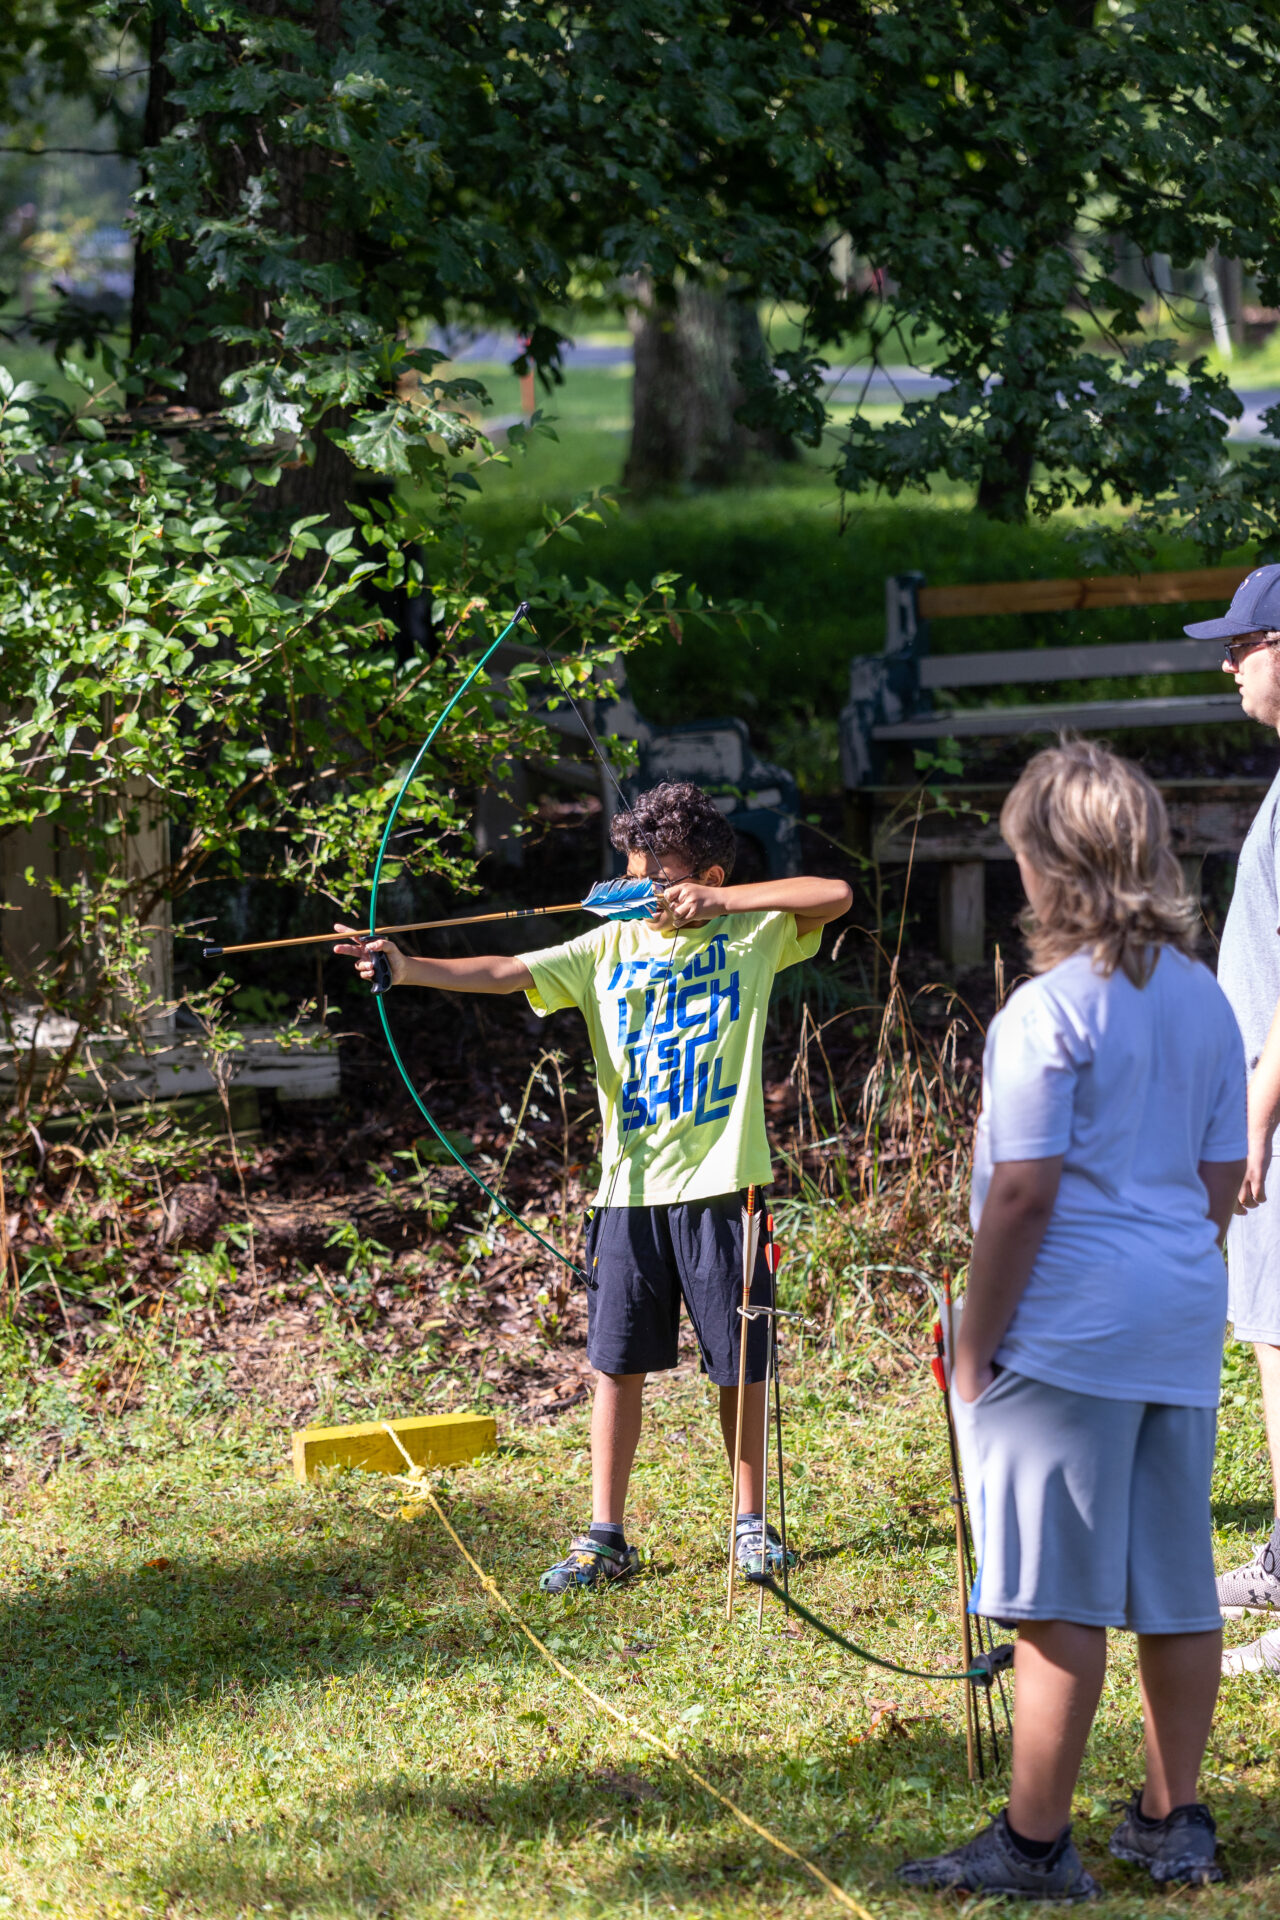 A group of people are playing archery in a park, using the BearTrax equipment.